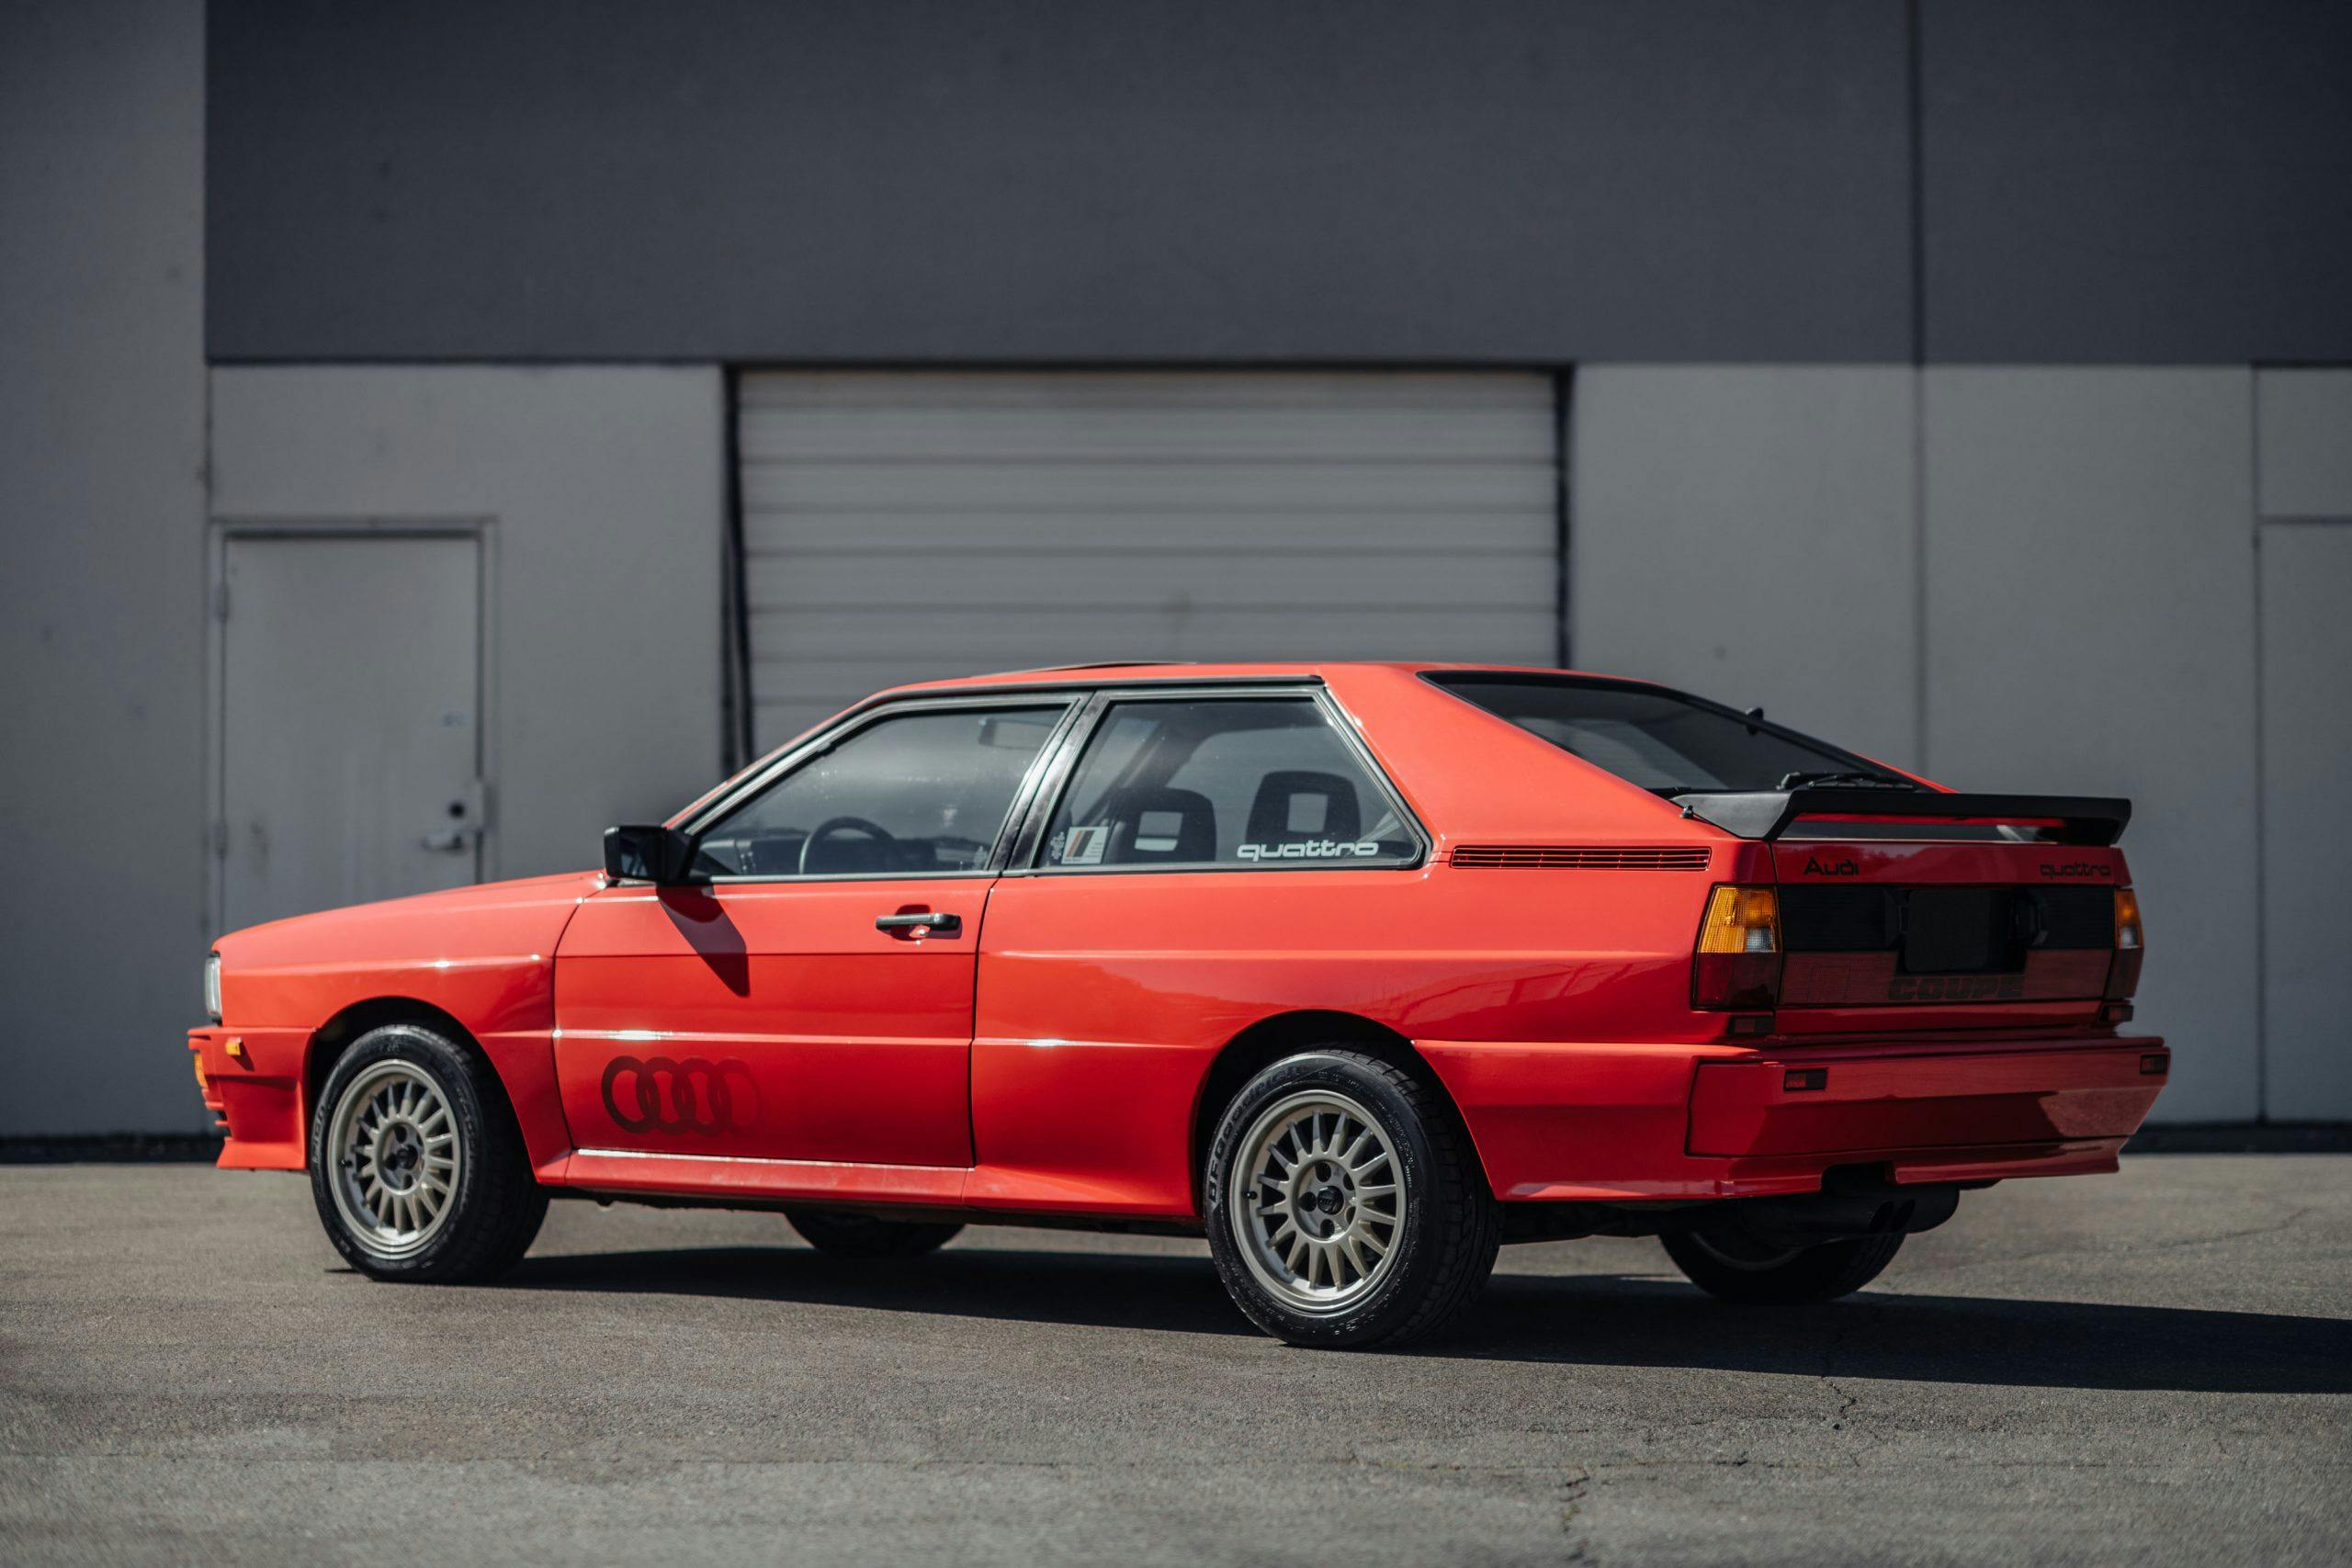 Ur-Quattro, trend-setter on the stage and street, is fast becoming blue-chip '80s classic - Hagerty Media